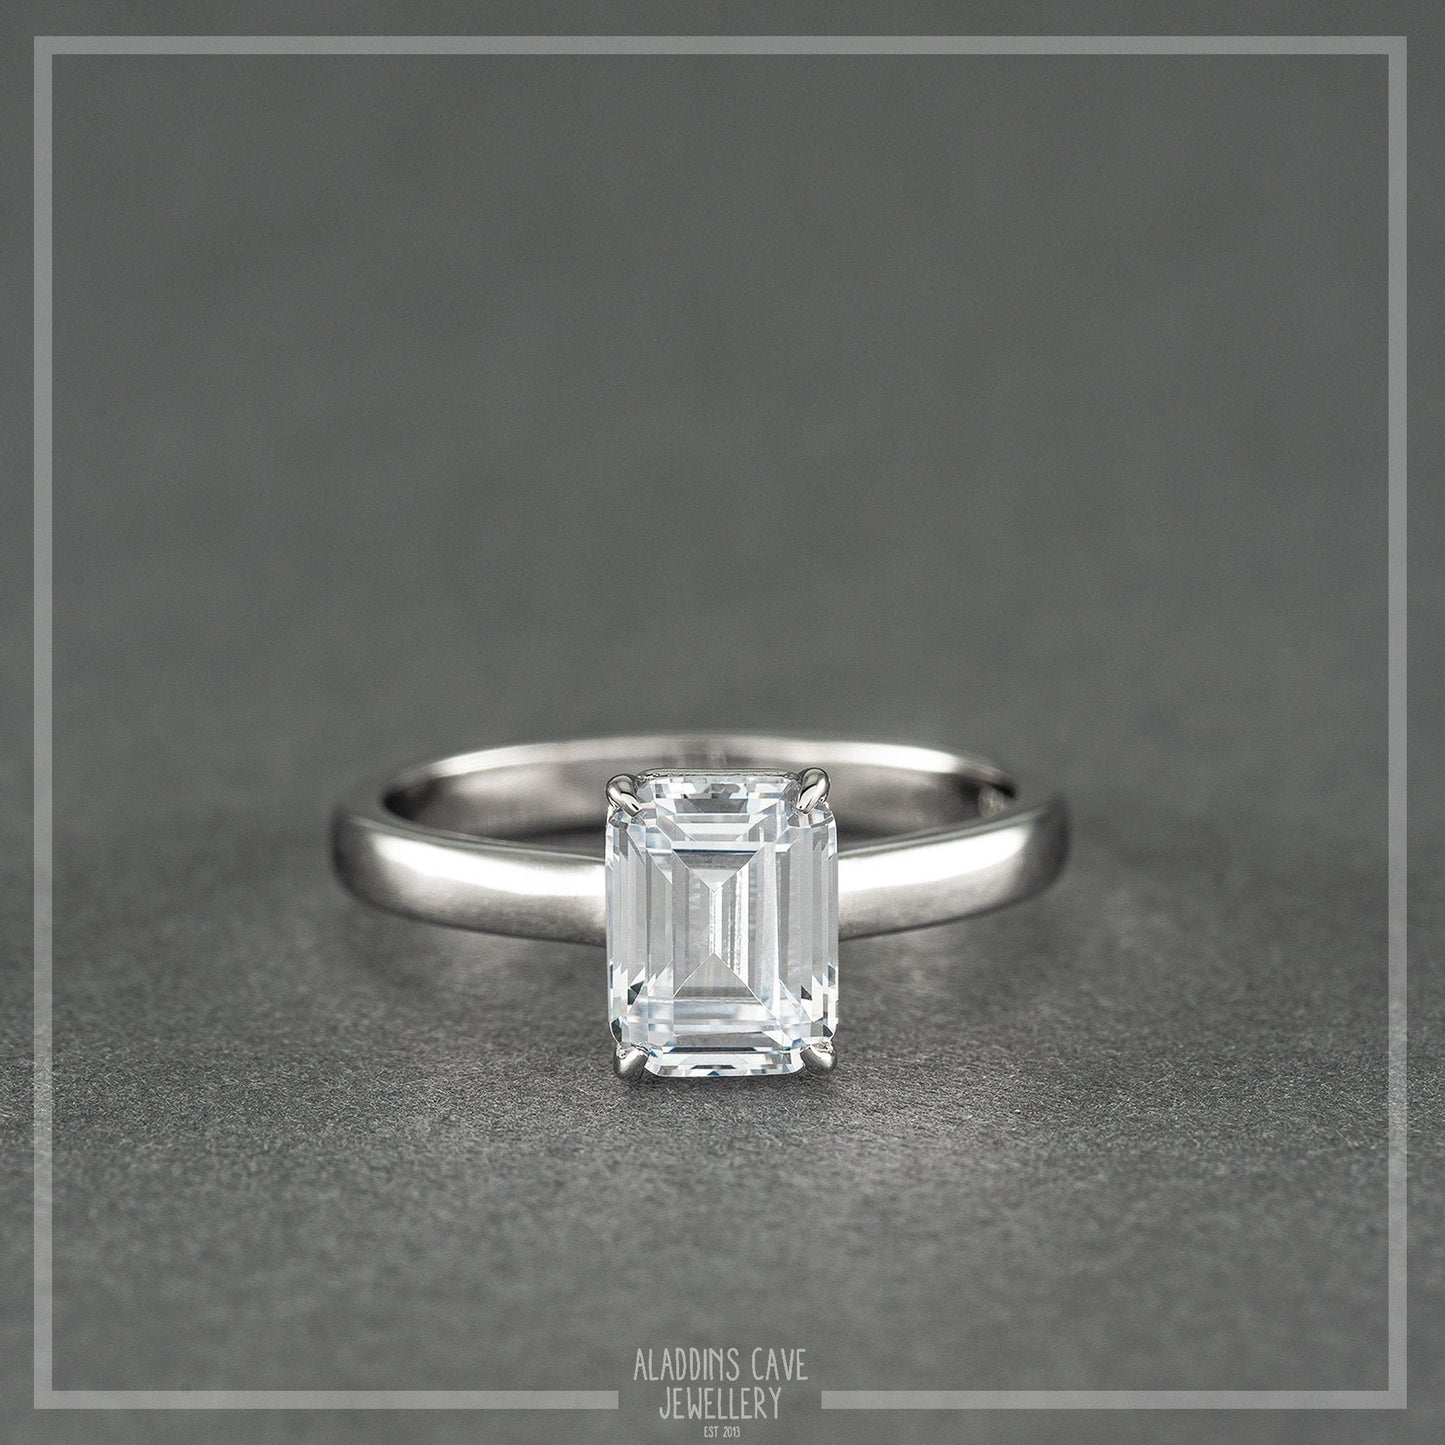 Wedding Set 1.9ct Emerald cut solitaire and half eternity simulated diamond ring available in Sterling Silver or White Gold Filled